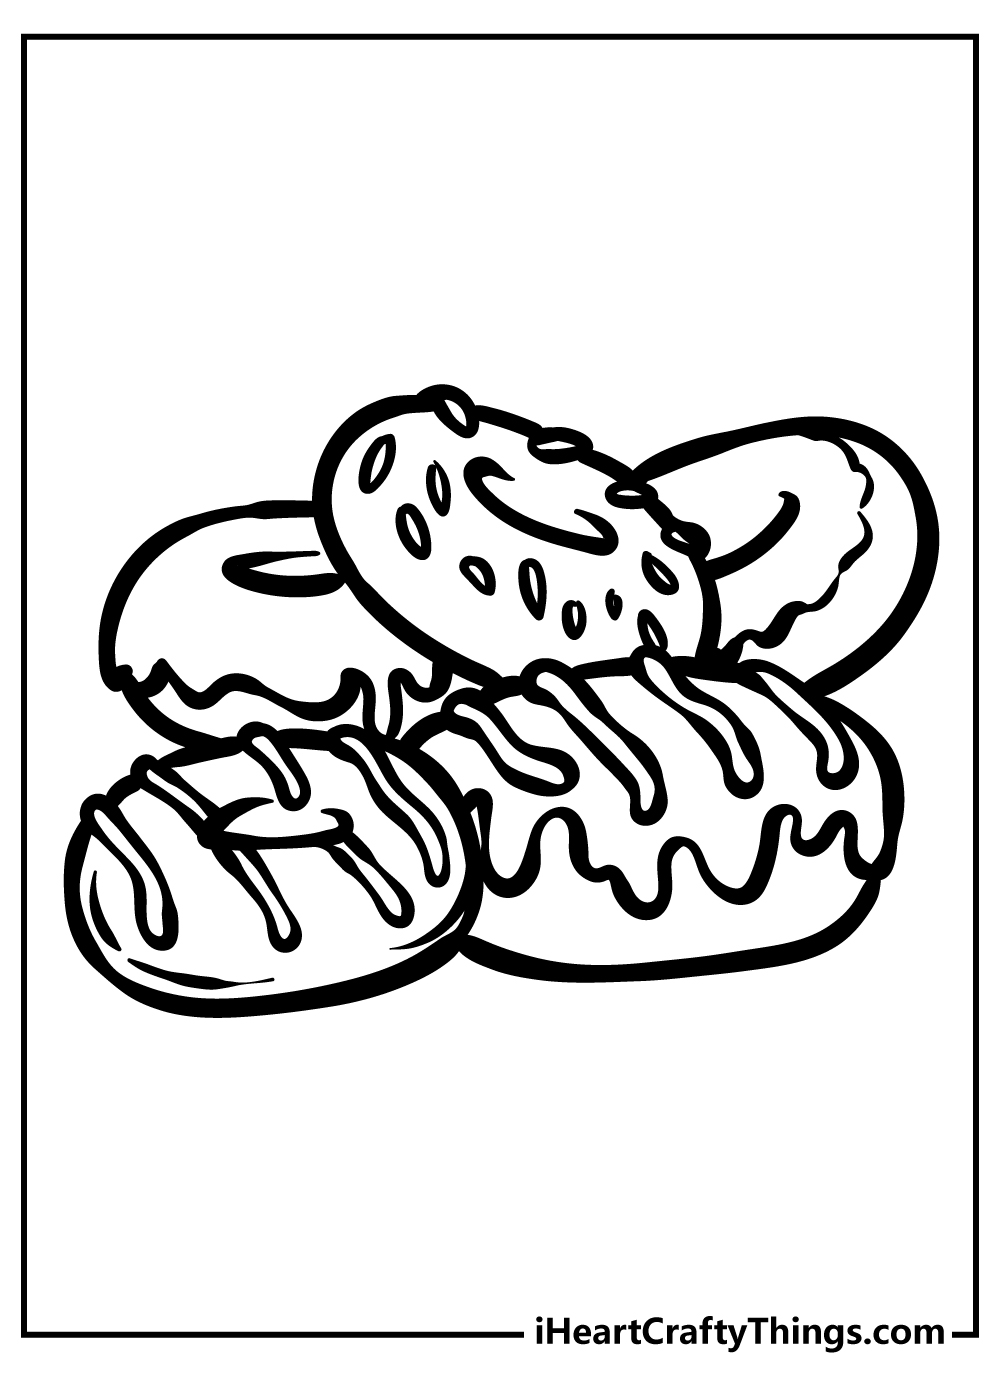 Donut Coloring Sheet for children free download